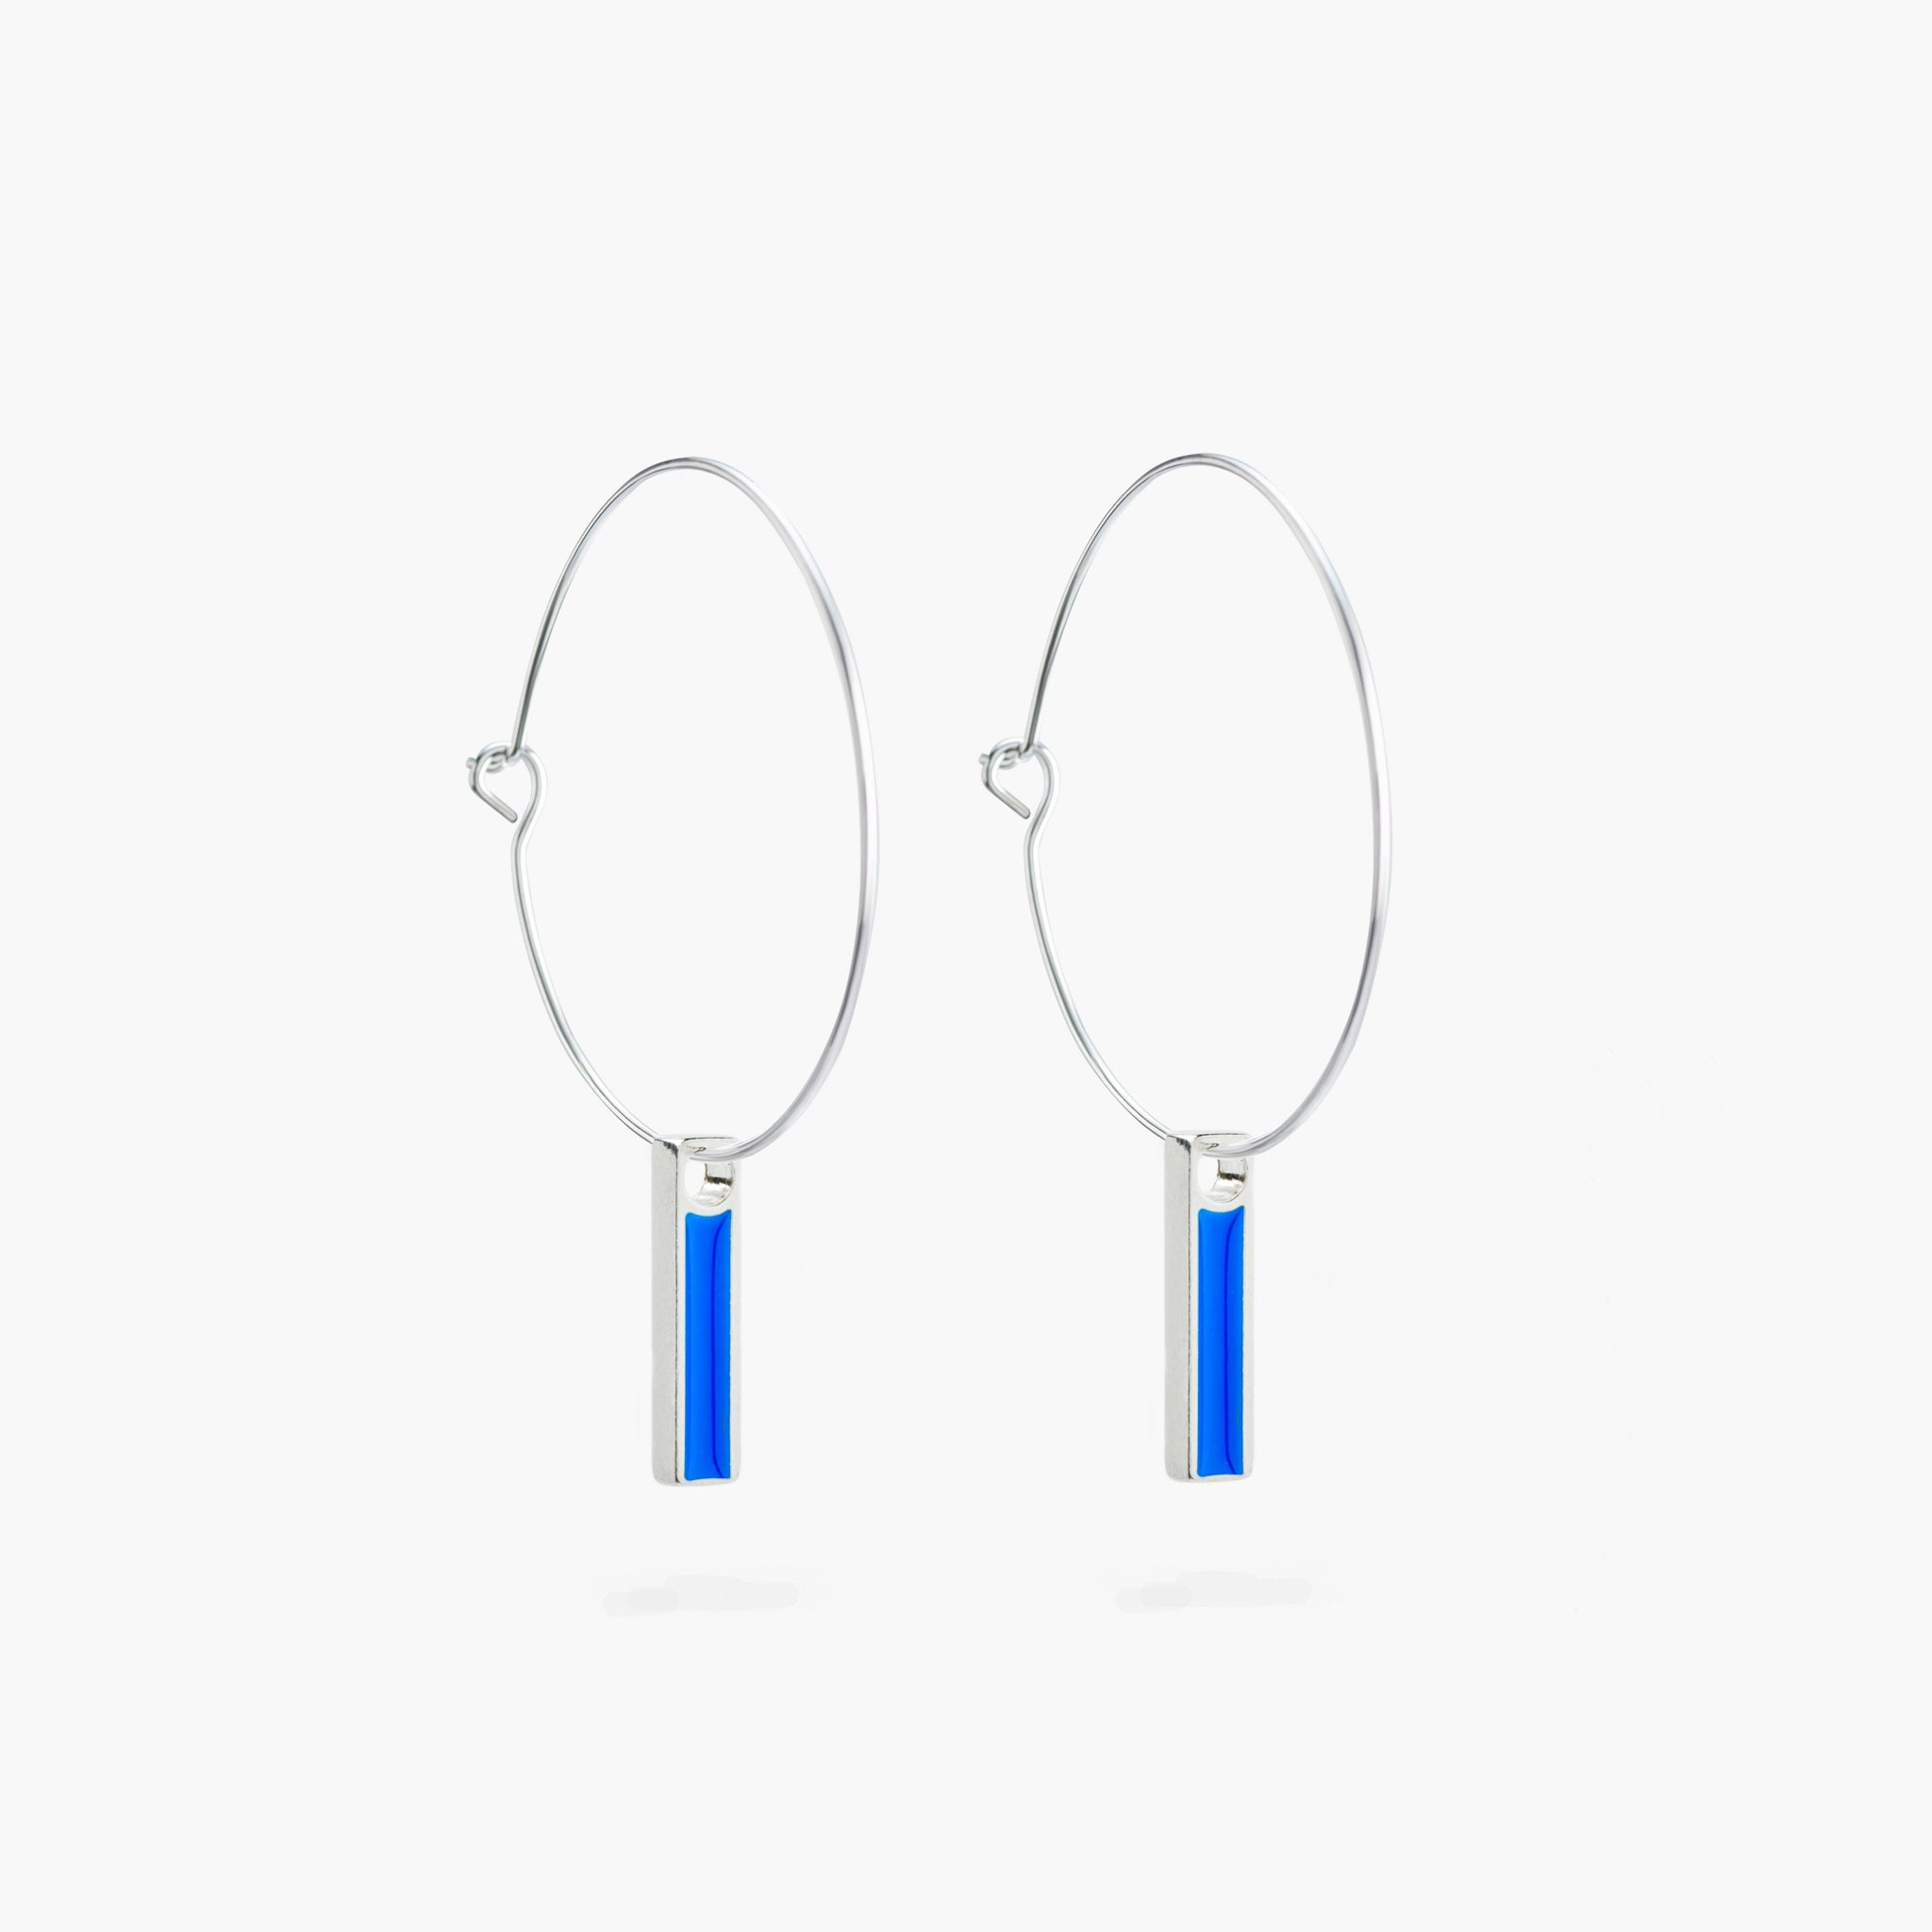 A simple pair of hoop earrings with a hanging blue bar.